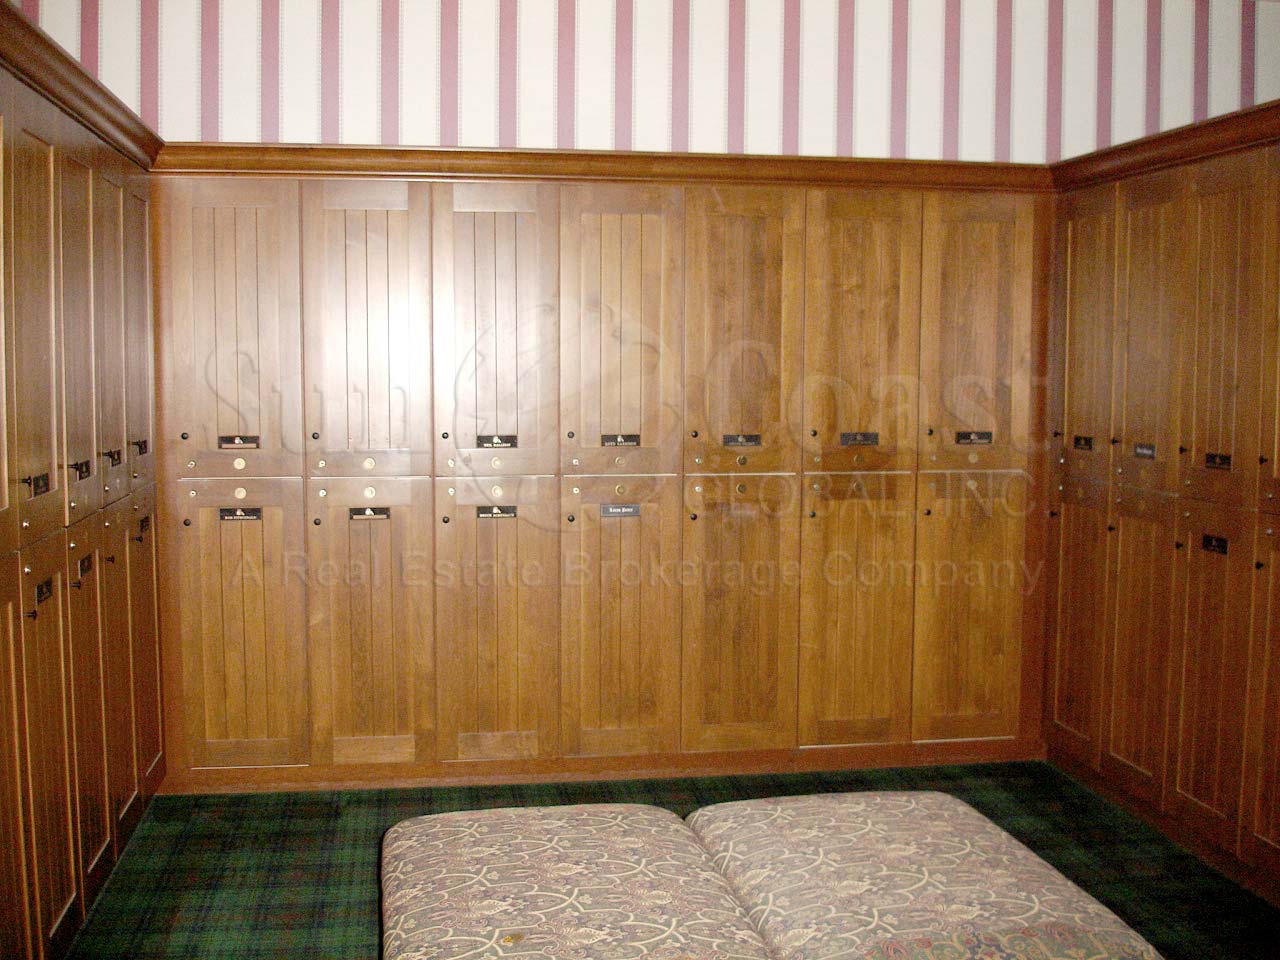 TWIN EAGLES Golf and Country Club locker room